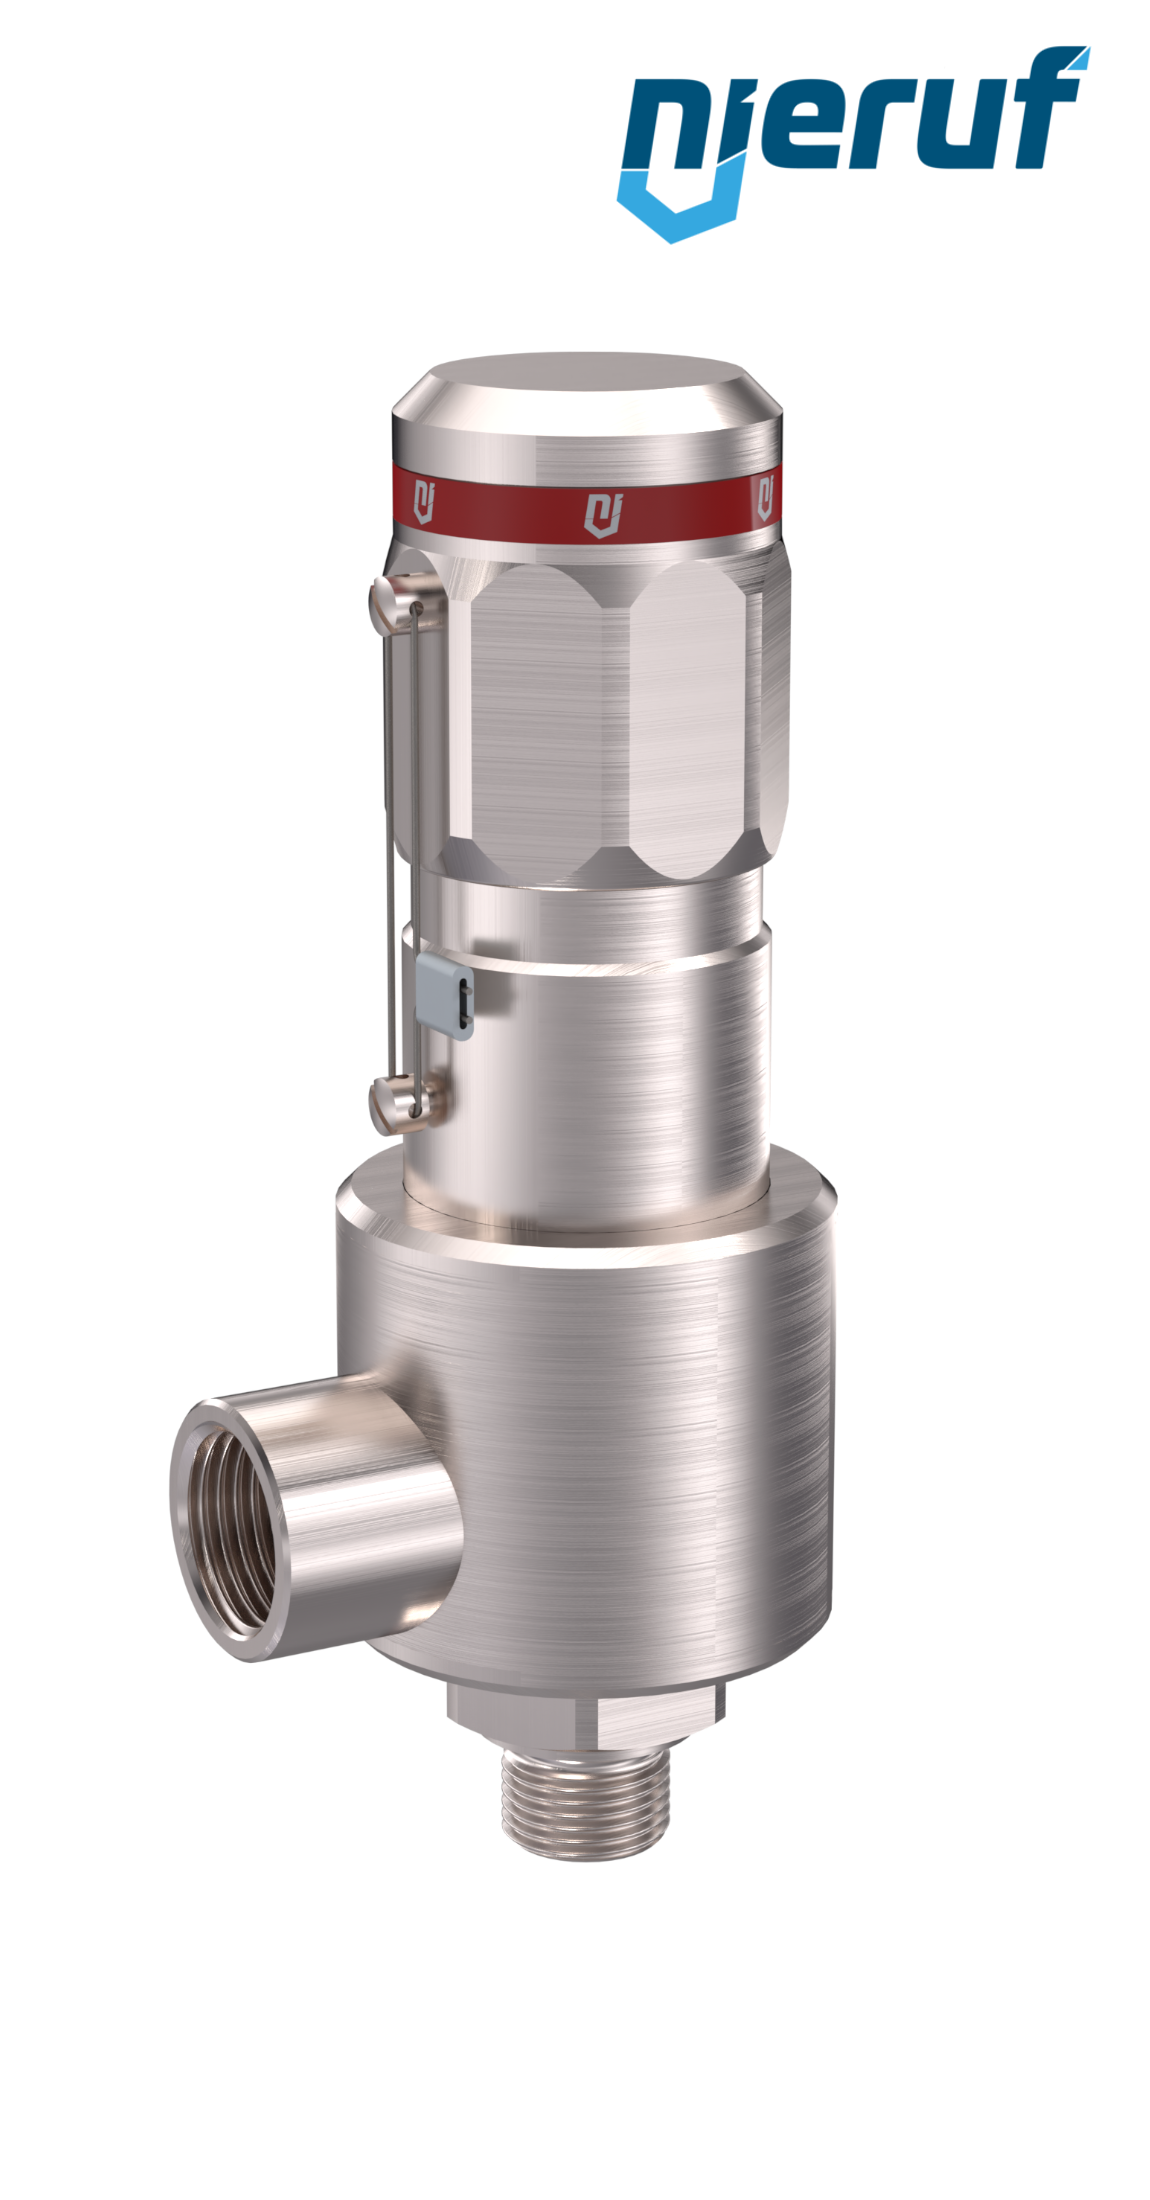 safety-valve DN6 1/4" m x 1" fm male thread NPT, SV15, MD/ PEEK, without lifting device, angle-type, >500,0 - 1100,0 bar